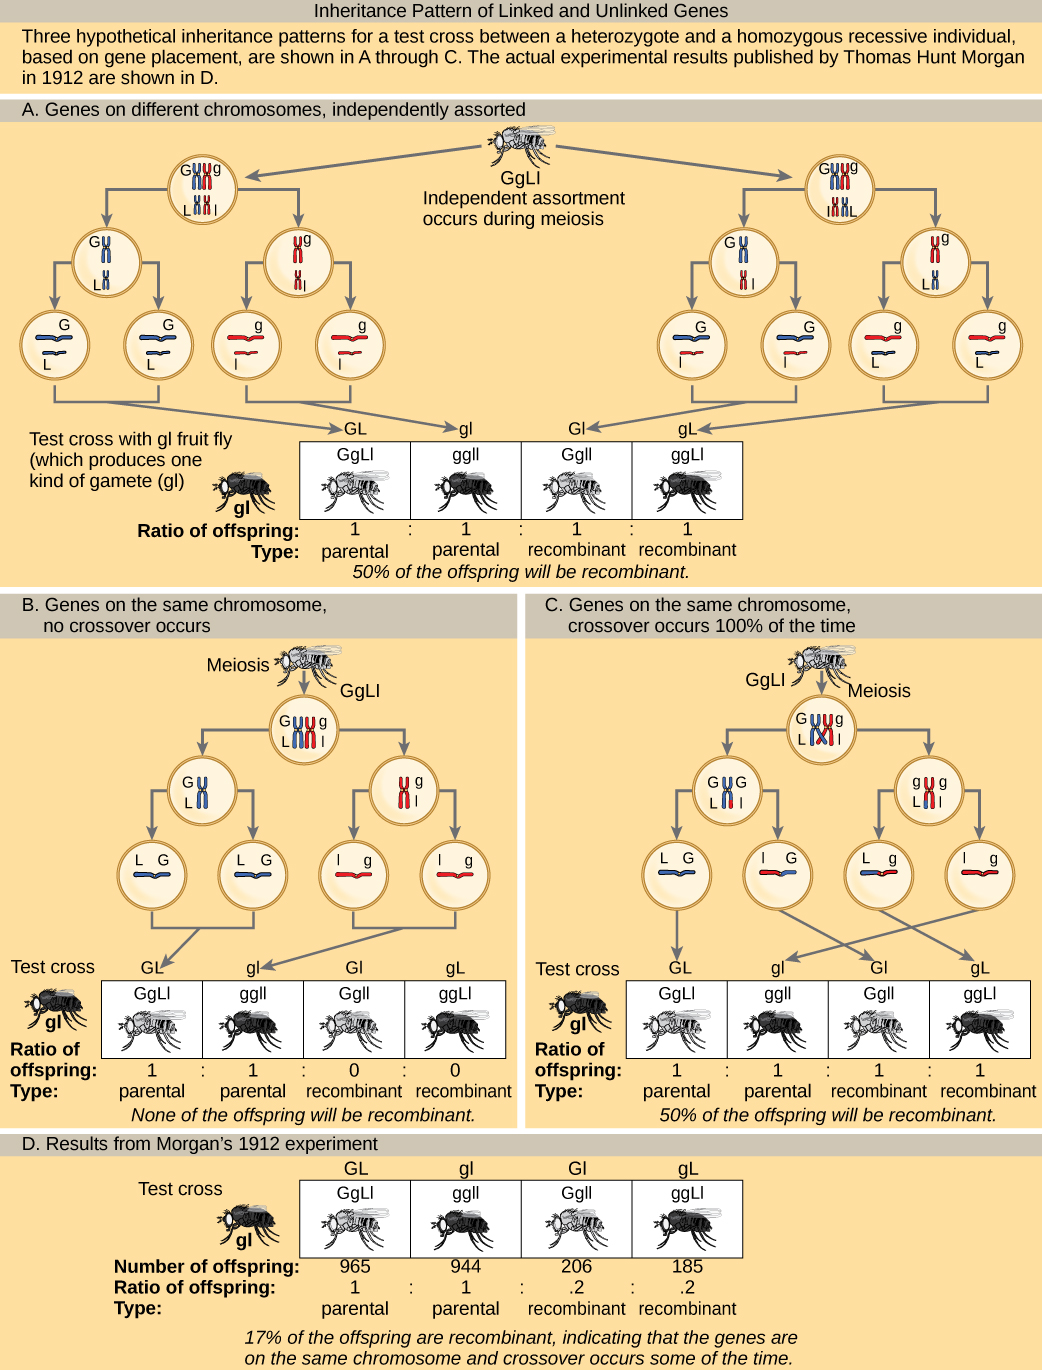 The illustration shows the possible inheritance patterns of linked and unlinked genes. The example used includes fruit fly body color and wing length. Fruit flies may have a dominant gray color (G) or a recessive black color (g). They may have dominant long wings (L) or recessive short wings (l). Three hypothetical inheritance patterns for a test cross between a heterozygous and a recessive fruit fly are shown, based on gene placement. The actual experimental results published by Thomas Hunt Morgan in 1912 are also shown. In the first hypothetical inheritance pattern in part a, the genes for the two characteristics are on different chromosomes. Independent assortment occurs so that the ratio of genotypes in the offspring  is 1 GgLl:1 ggll:1 Ggll:1 ggLl, and 50% of the offspring are nonparental types. In the second hypothetical inheritance pattern in part b, the genes are close together on the same chromosome so that no crossover occurs between them.  The ratio of genotypes is 1 GgLl:1 ggll, and none of the offspring are recombinant. In the third hypothetical inheritance pattern in part c, the genes are far apart on the same chromosome so that crossing over occurs 100% of the time. The ratio of genotypes is the same as for genes on two different chromosomes, and 50% of the offspring are recombinant, nonparental types. Part d shows that the number of offspring that Thomas Hunt Morgan actually observed was 965: 944: 206:185 (GgLl:ggll:Ggll:ggLl). Seventeen percent of the offspring were recombinant, indicating that the genes are on the same chromosome and crossing over occurs between them some of the time.